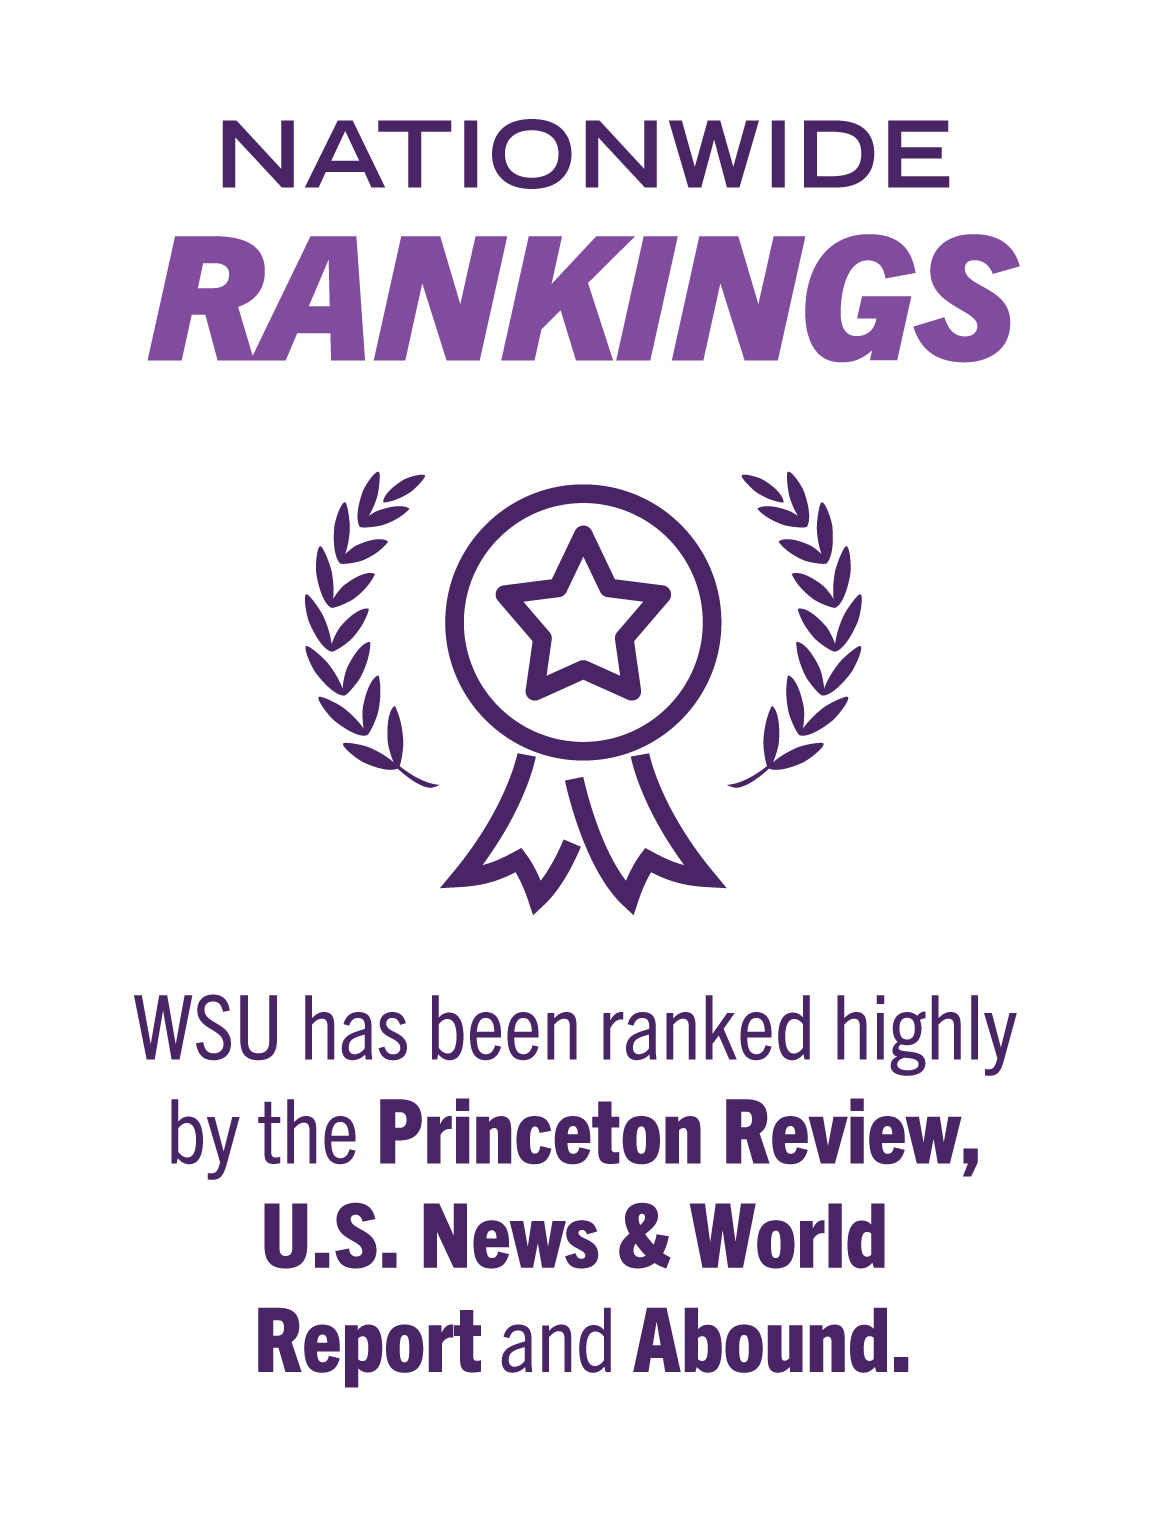 WSU has been ranked highly by the Princeton Review, U.S. News & World Report and Abound.